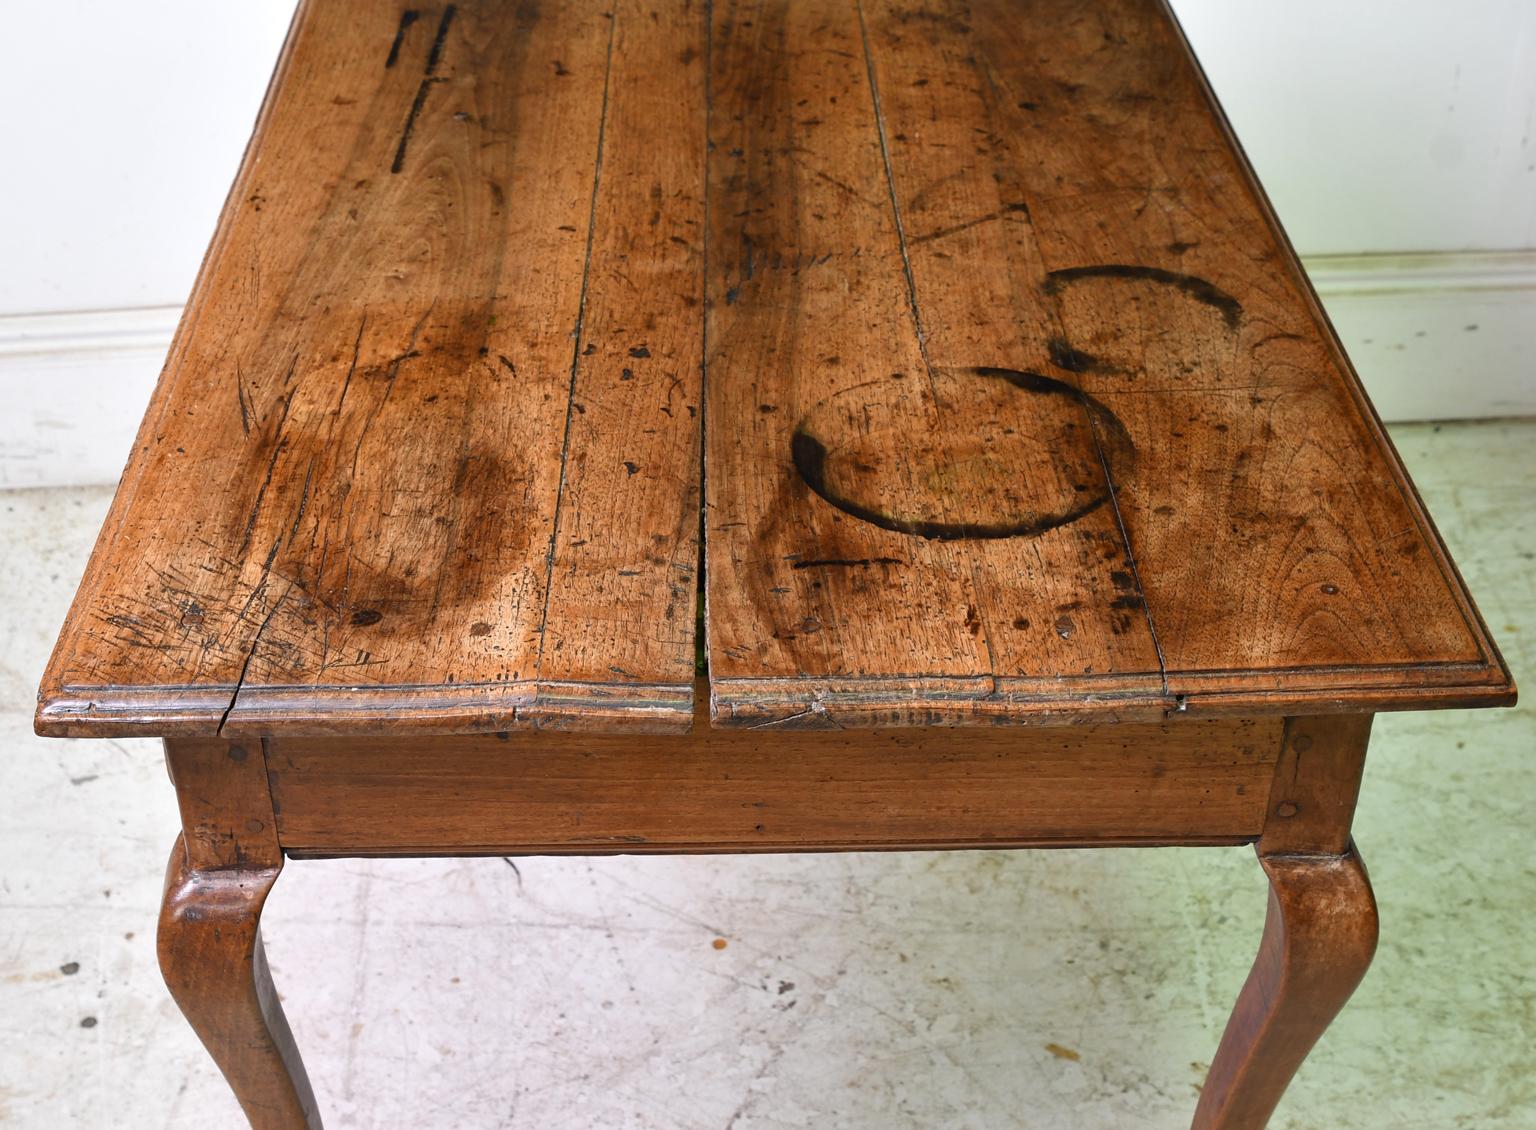 French Provincial Cherry Writing Table or Bedside Table with Drawer, circa 1800 For Sale 4